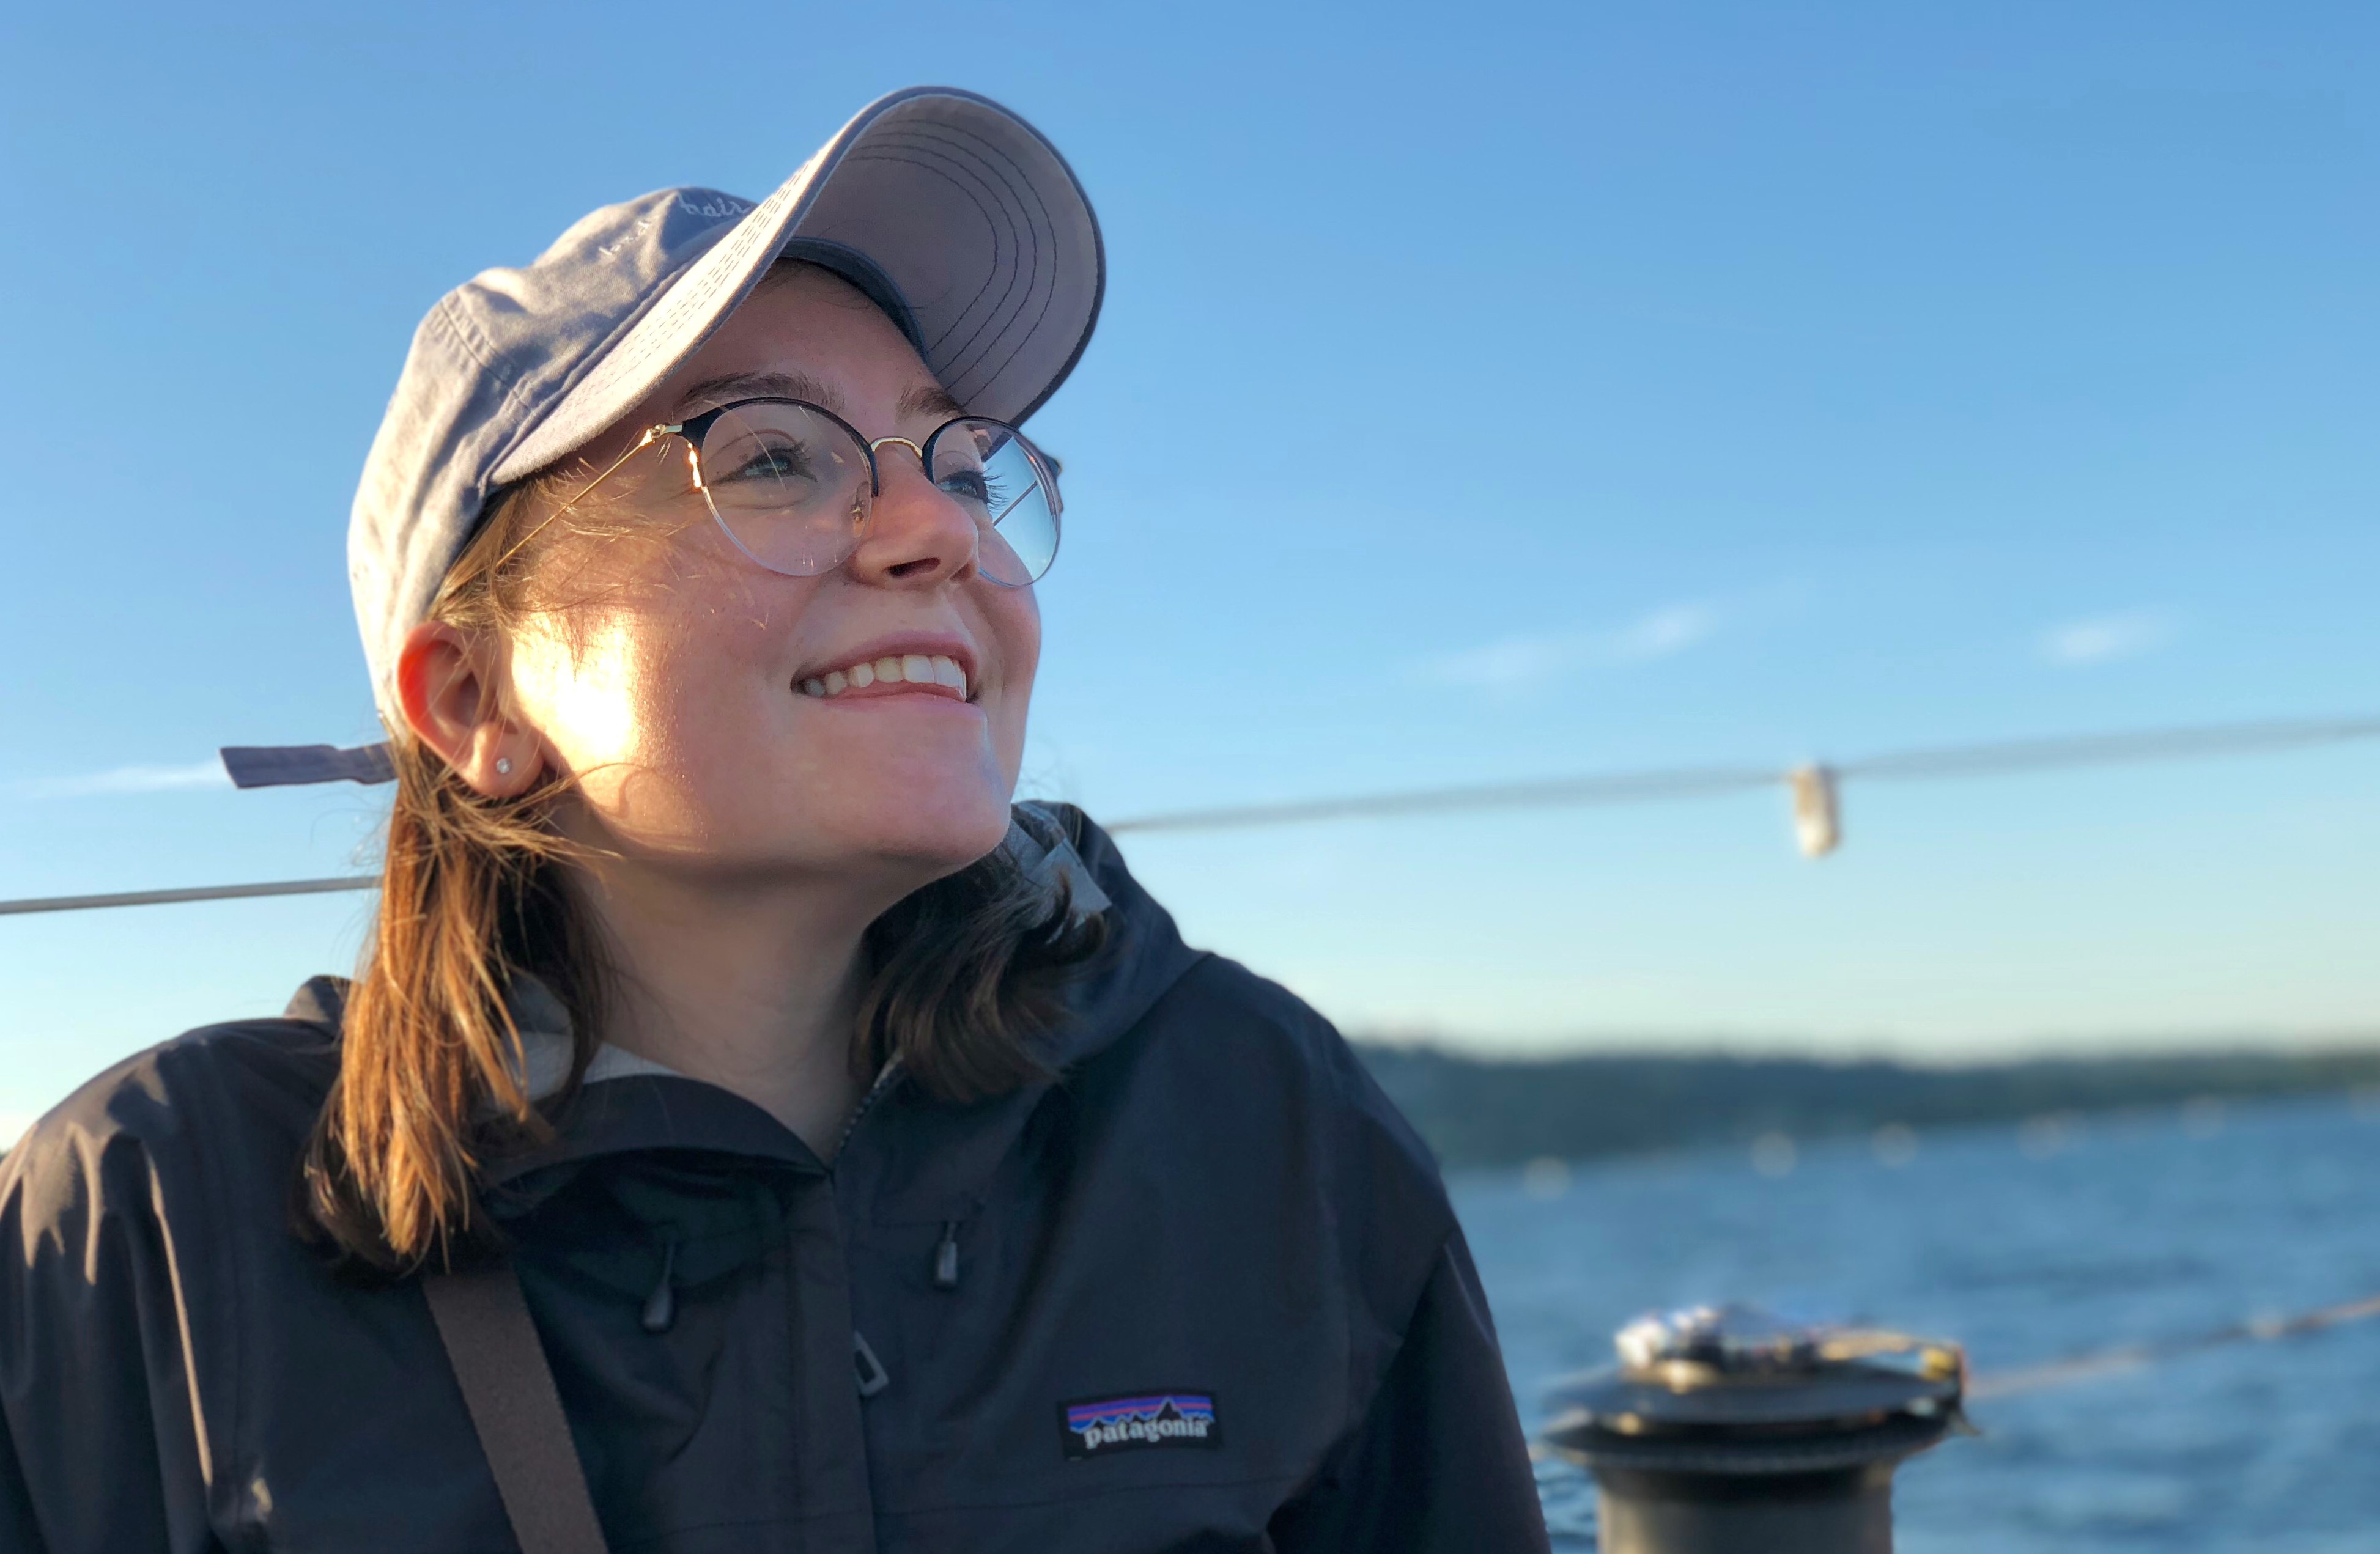 Jaylin Herskovitz on a sailboat on a lake. She is looking to the right and smiling.